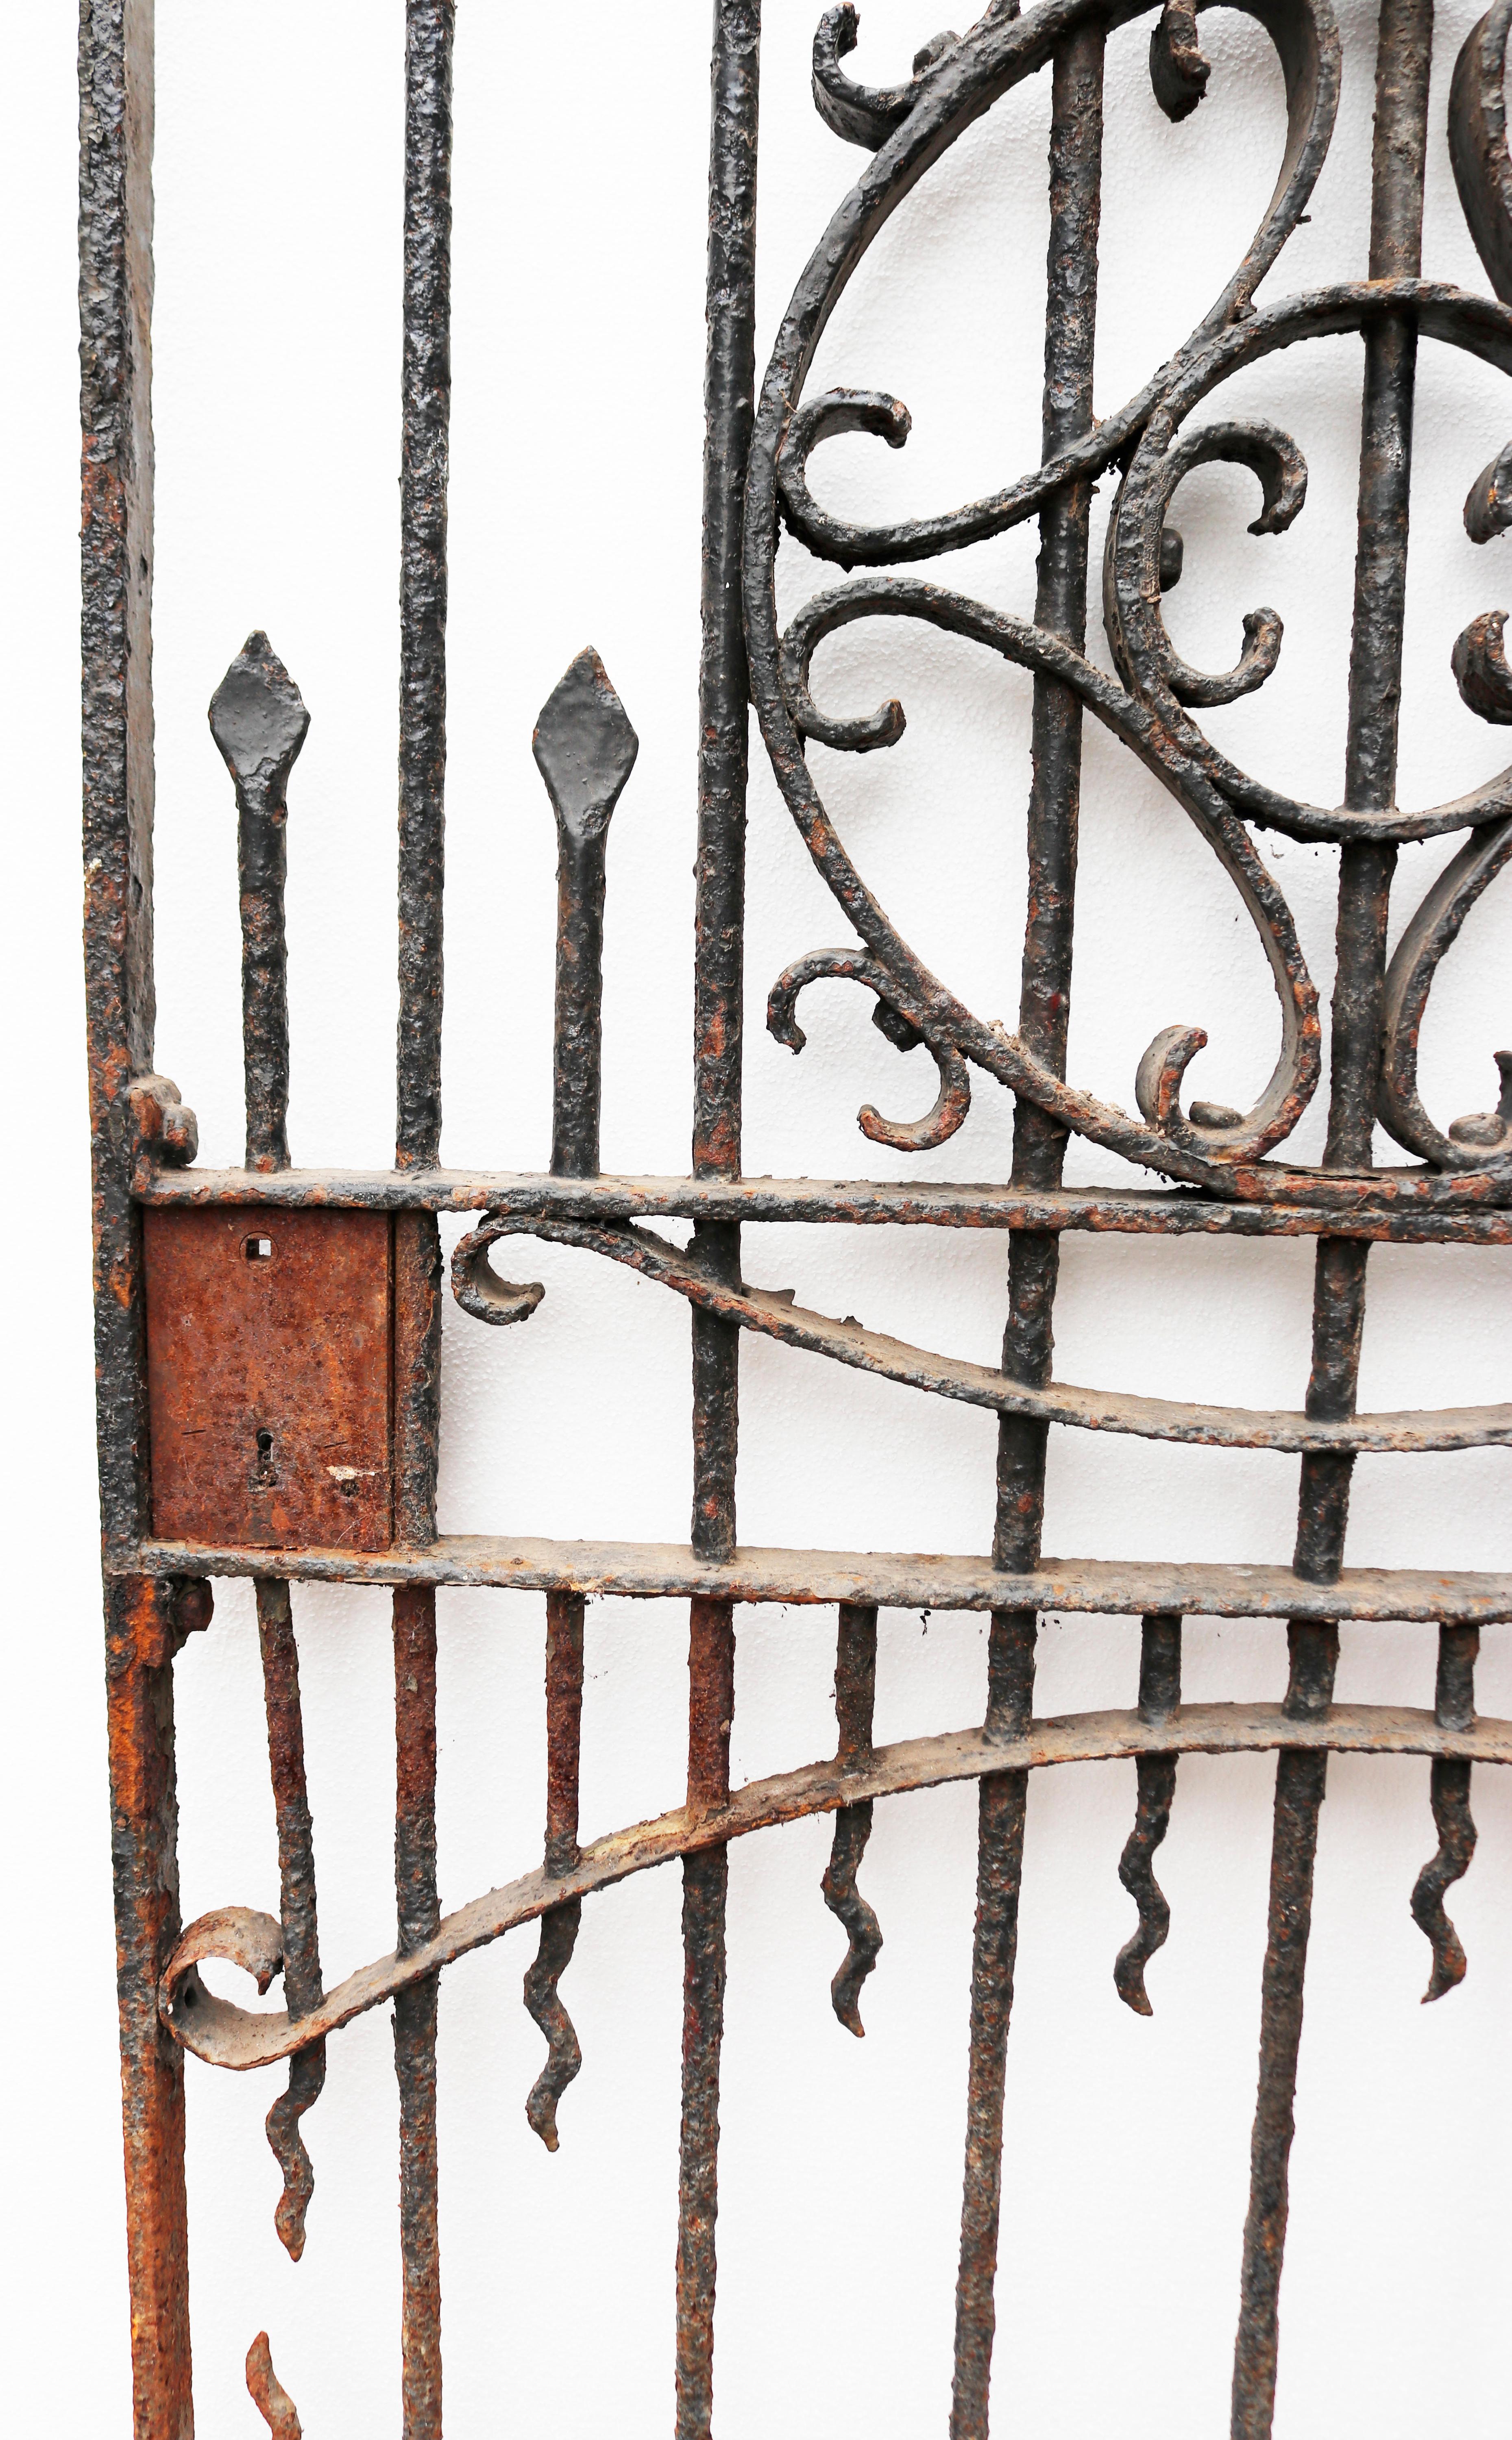 Tall Victorian antique wrought iron gate with decorative scroll pattern.